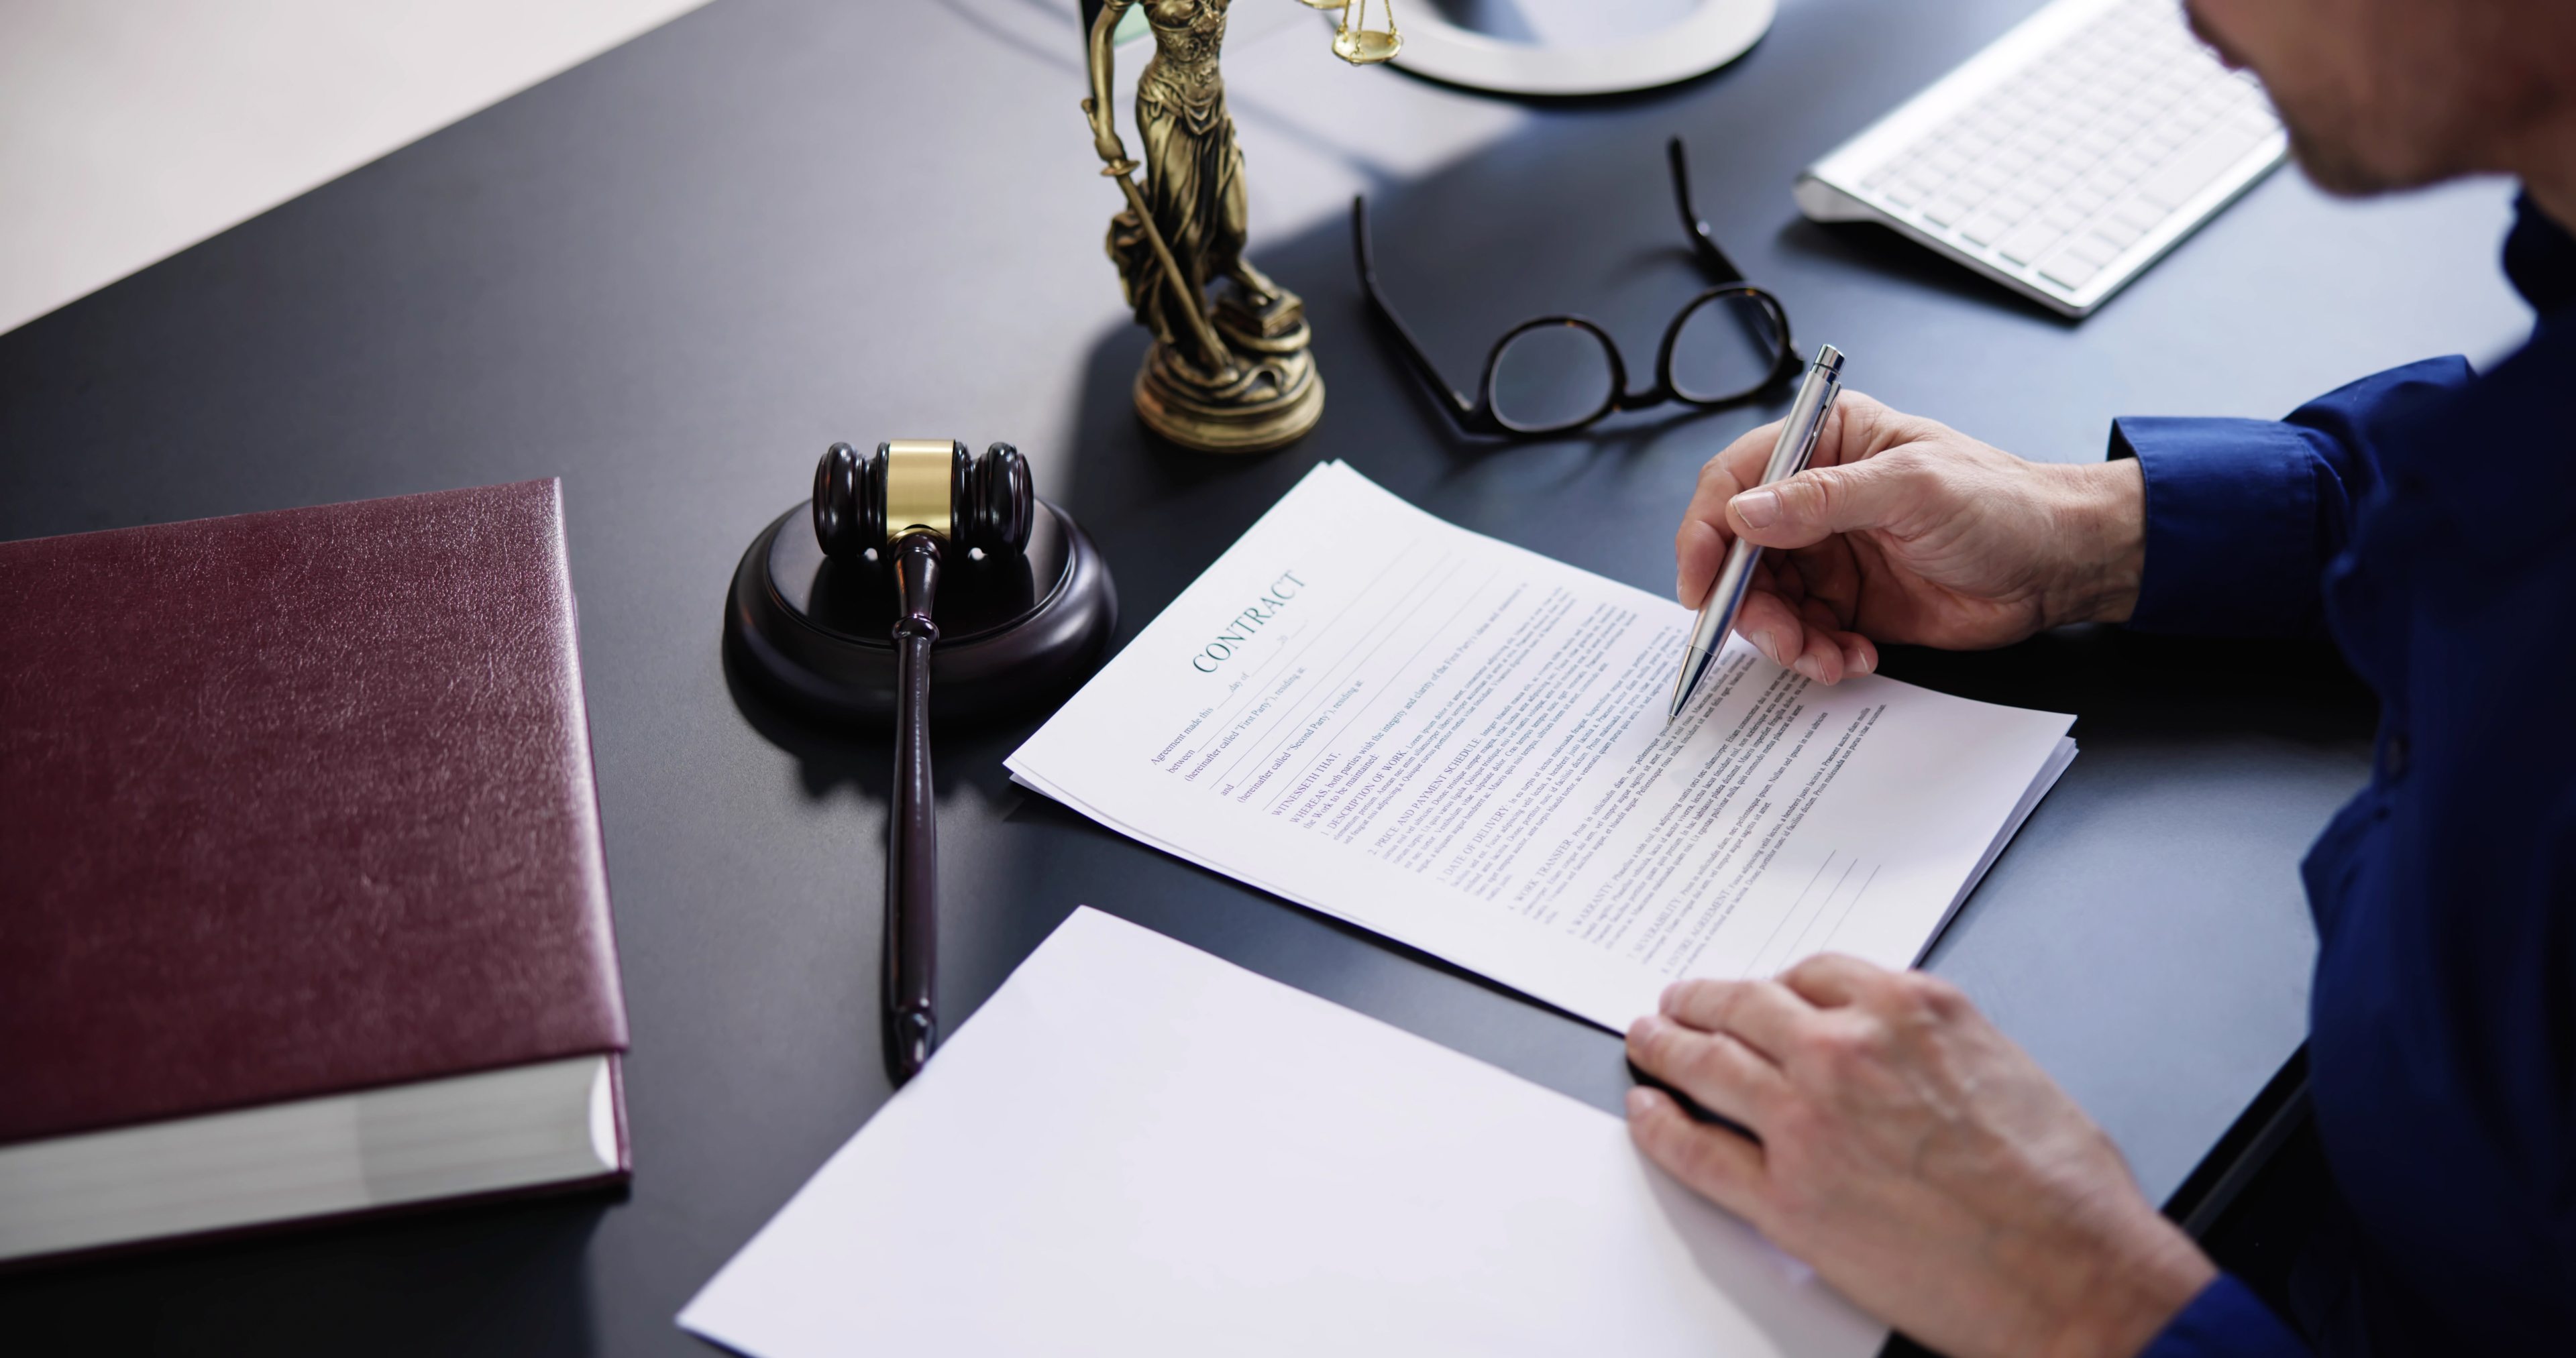 A Michigan gun lawyer prepares legal documents for a civil infraction case involving a minor misdemeanor offense related to guns, showcasing the expertise needed in such extremely difficult legal battles.